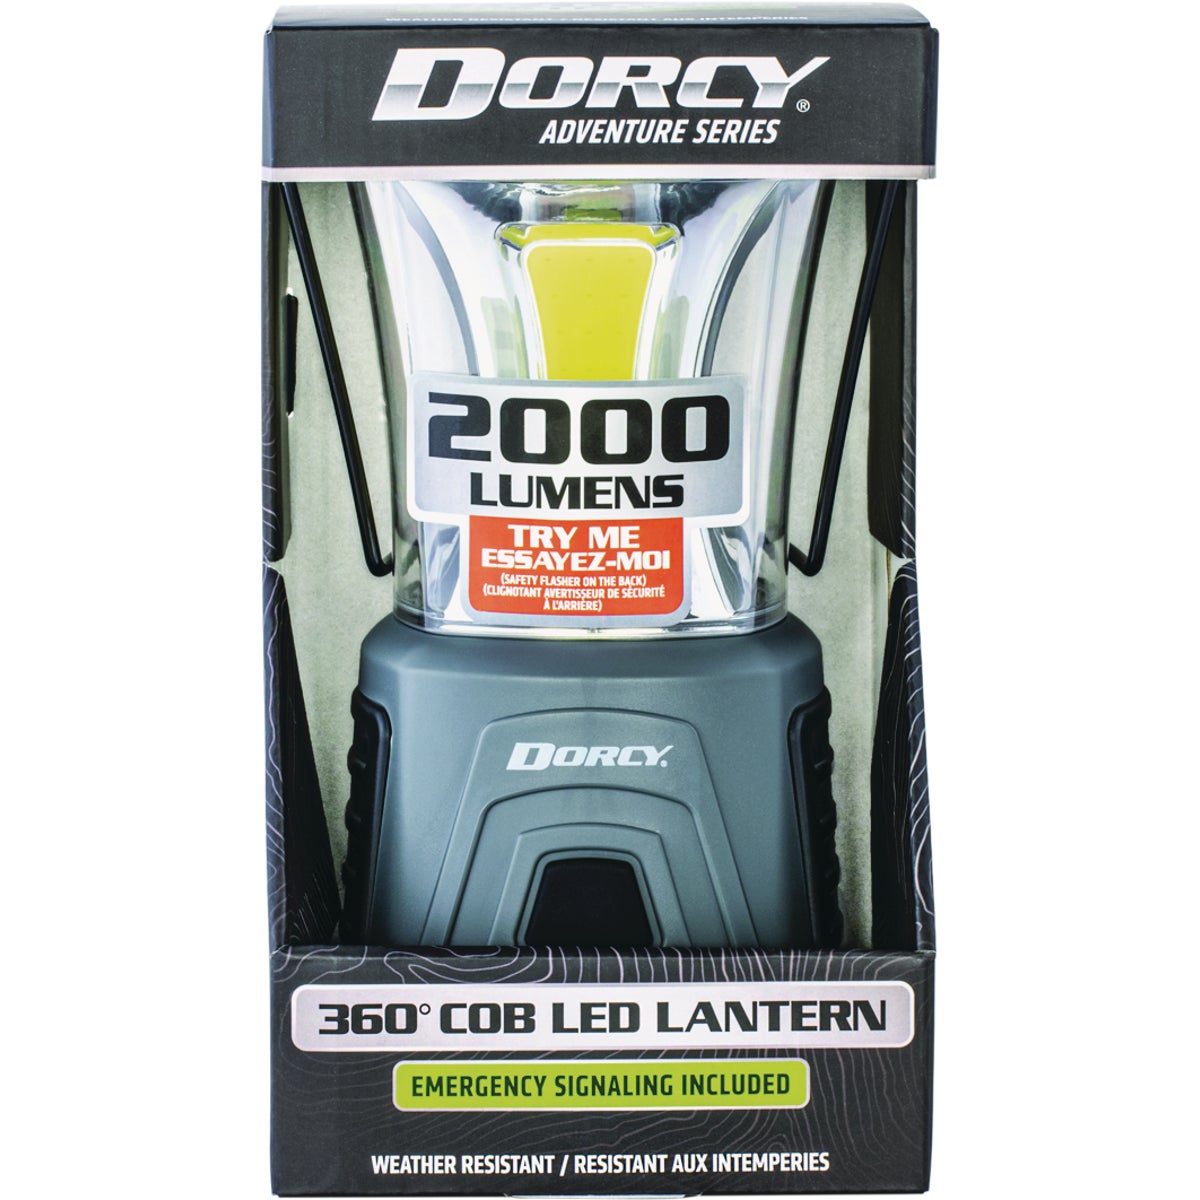 Dorcy Adventure Series Black & Gray Plastic LED Lantern with Red Safety Flasher